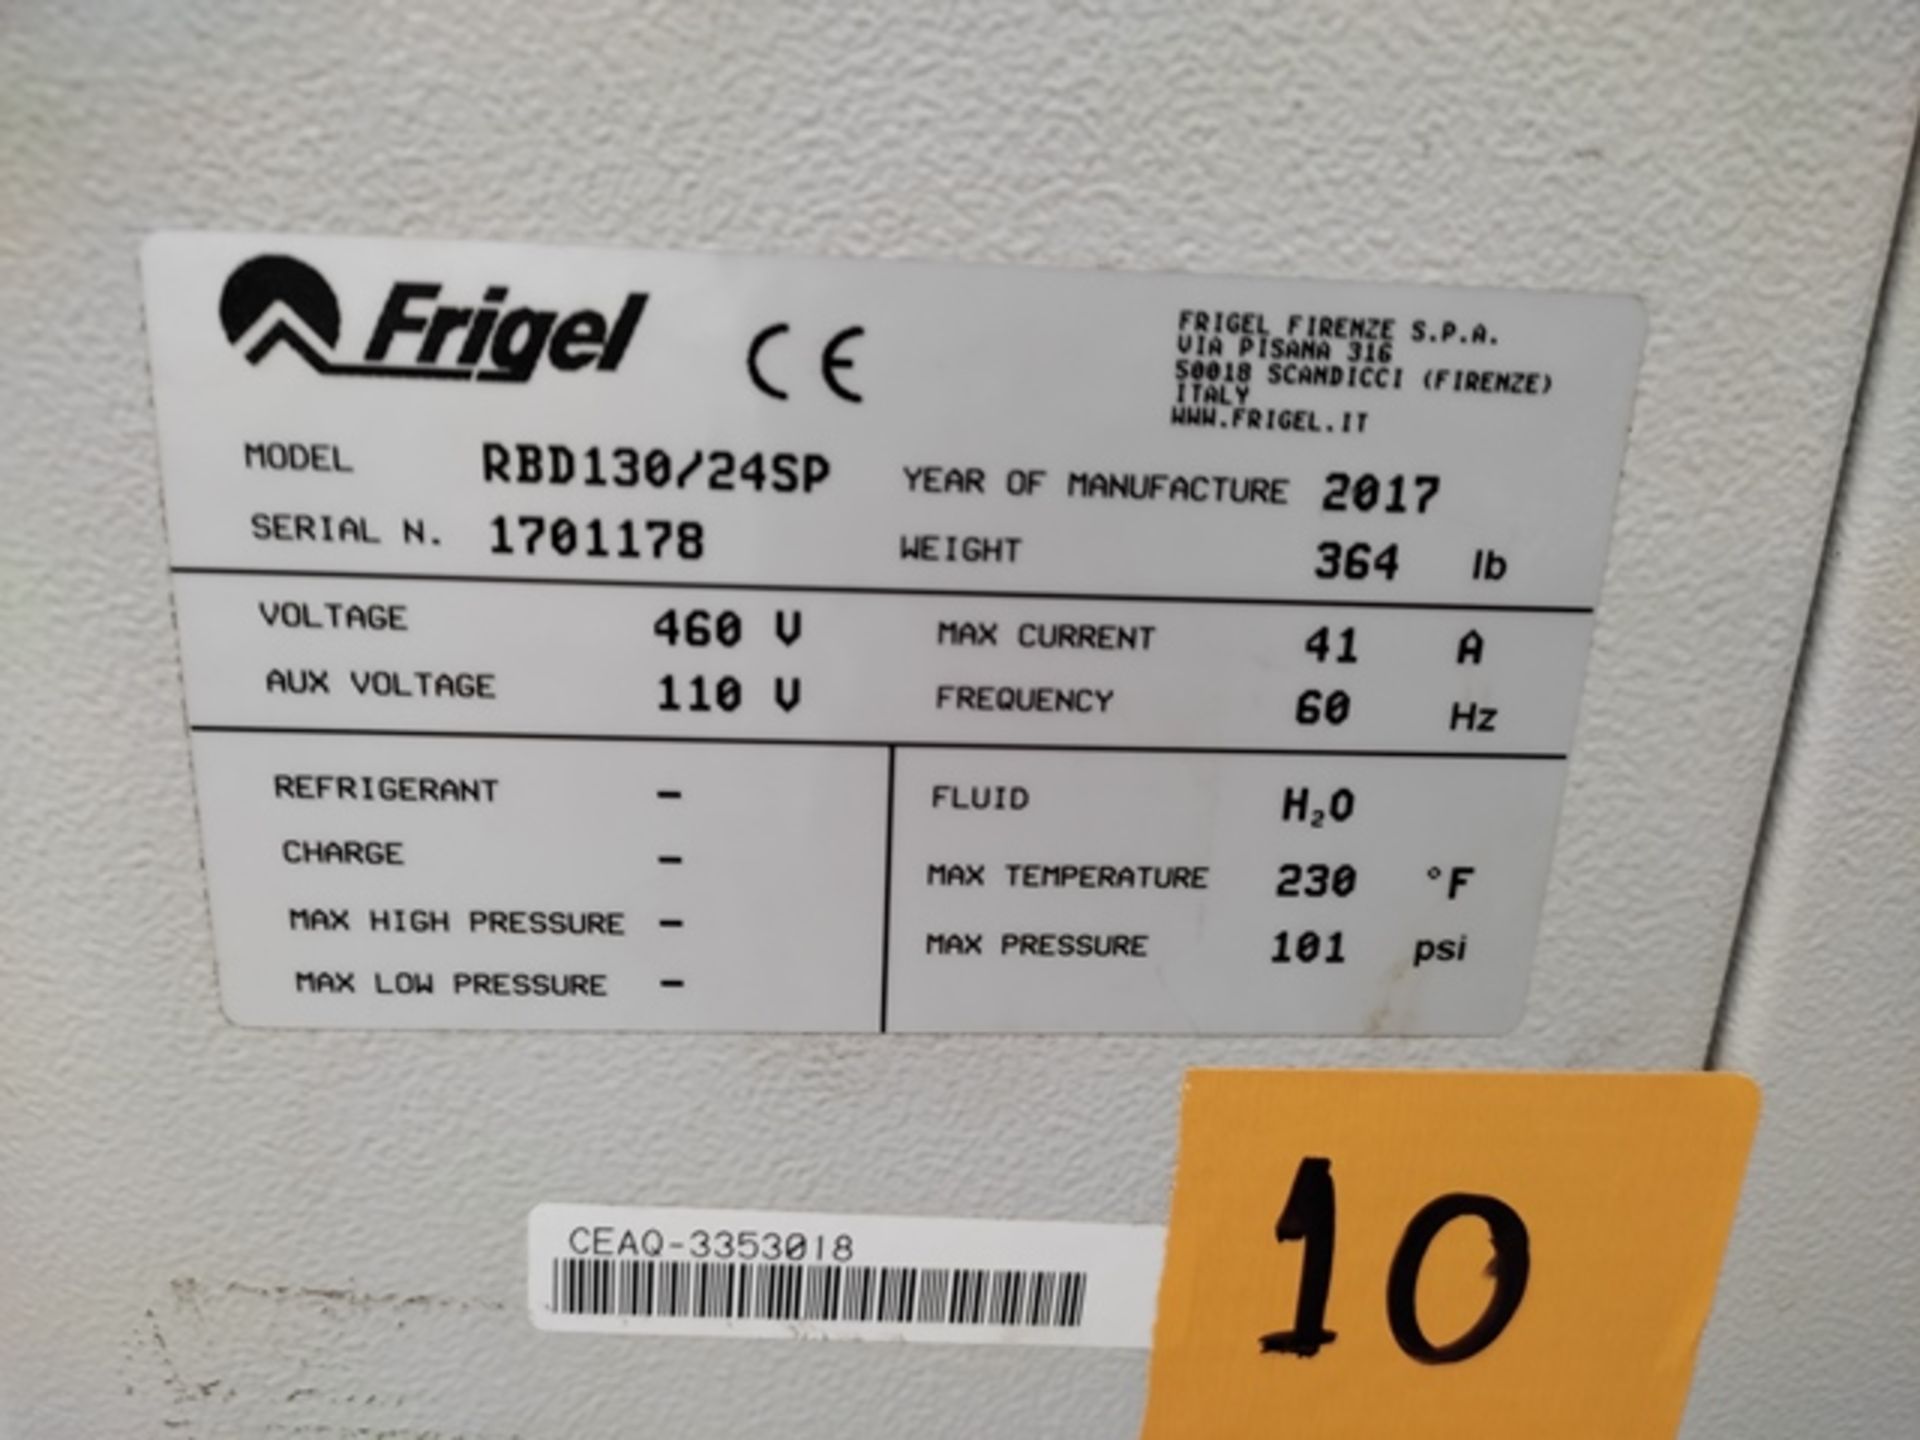 Lot of: (2) Frigel RBD130/24 SP 24 KW Flow Booster Temperature Controller, Mfg. Year: 2017 - Image 11 of 11